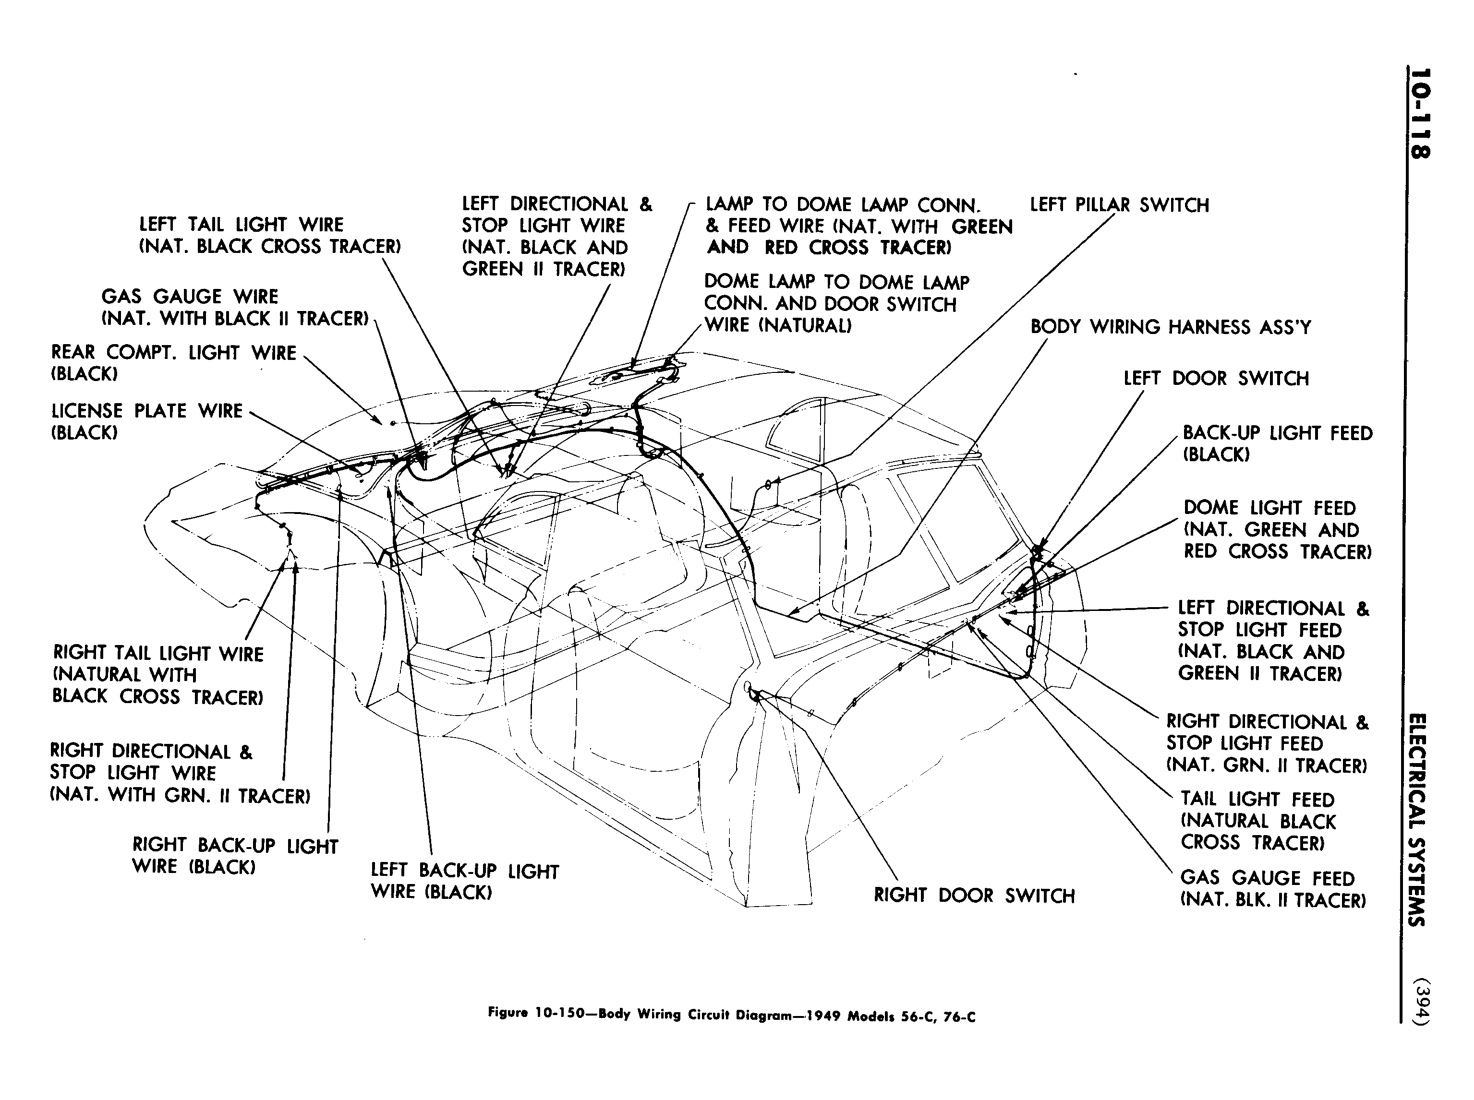 n_11 1948 Buick Shop Manual - Electrical Systems-118-118.jpg